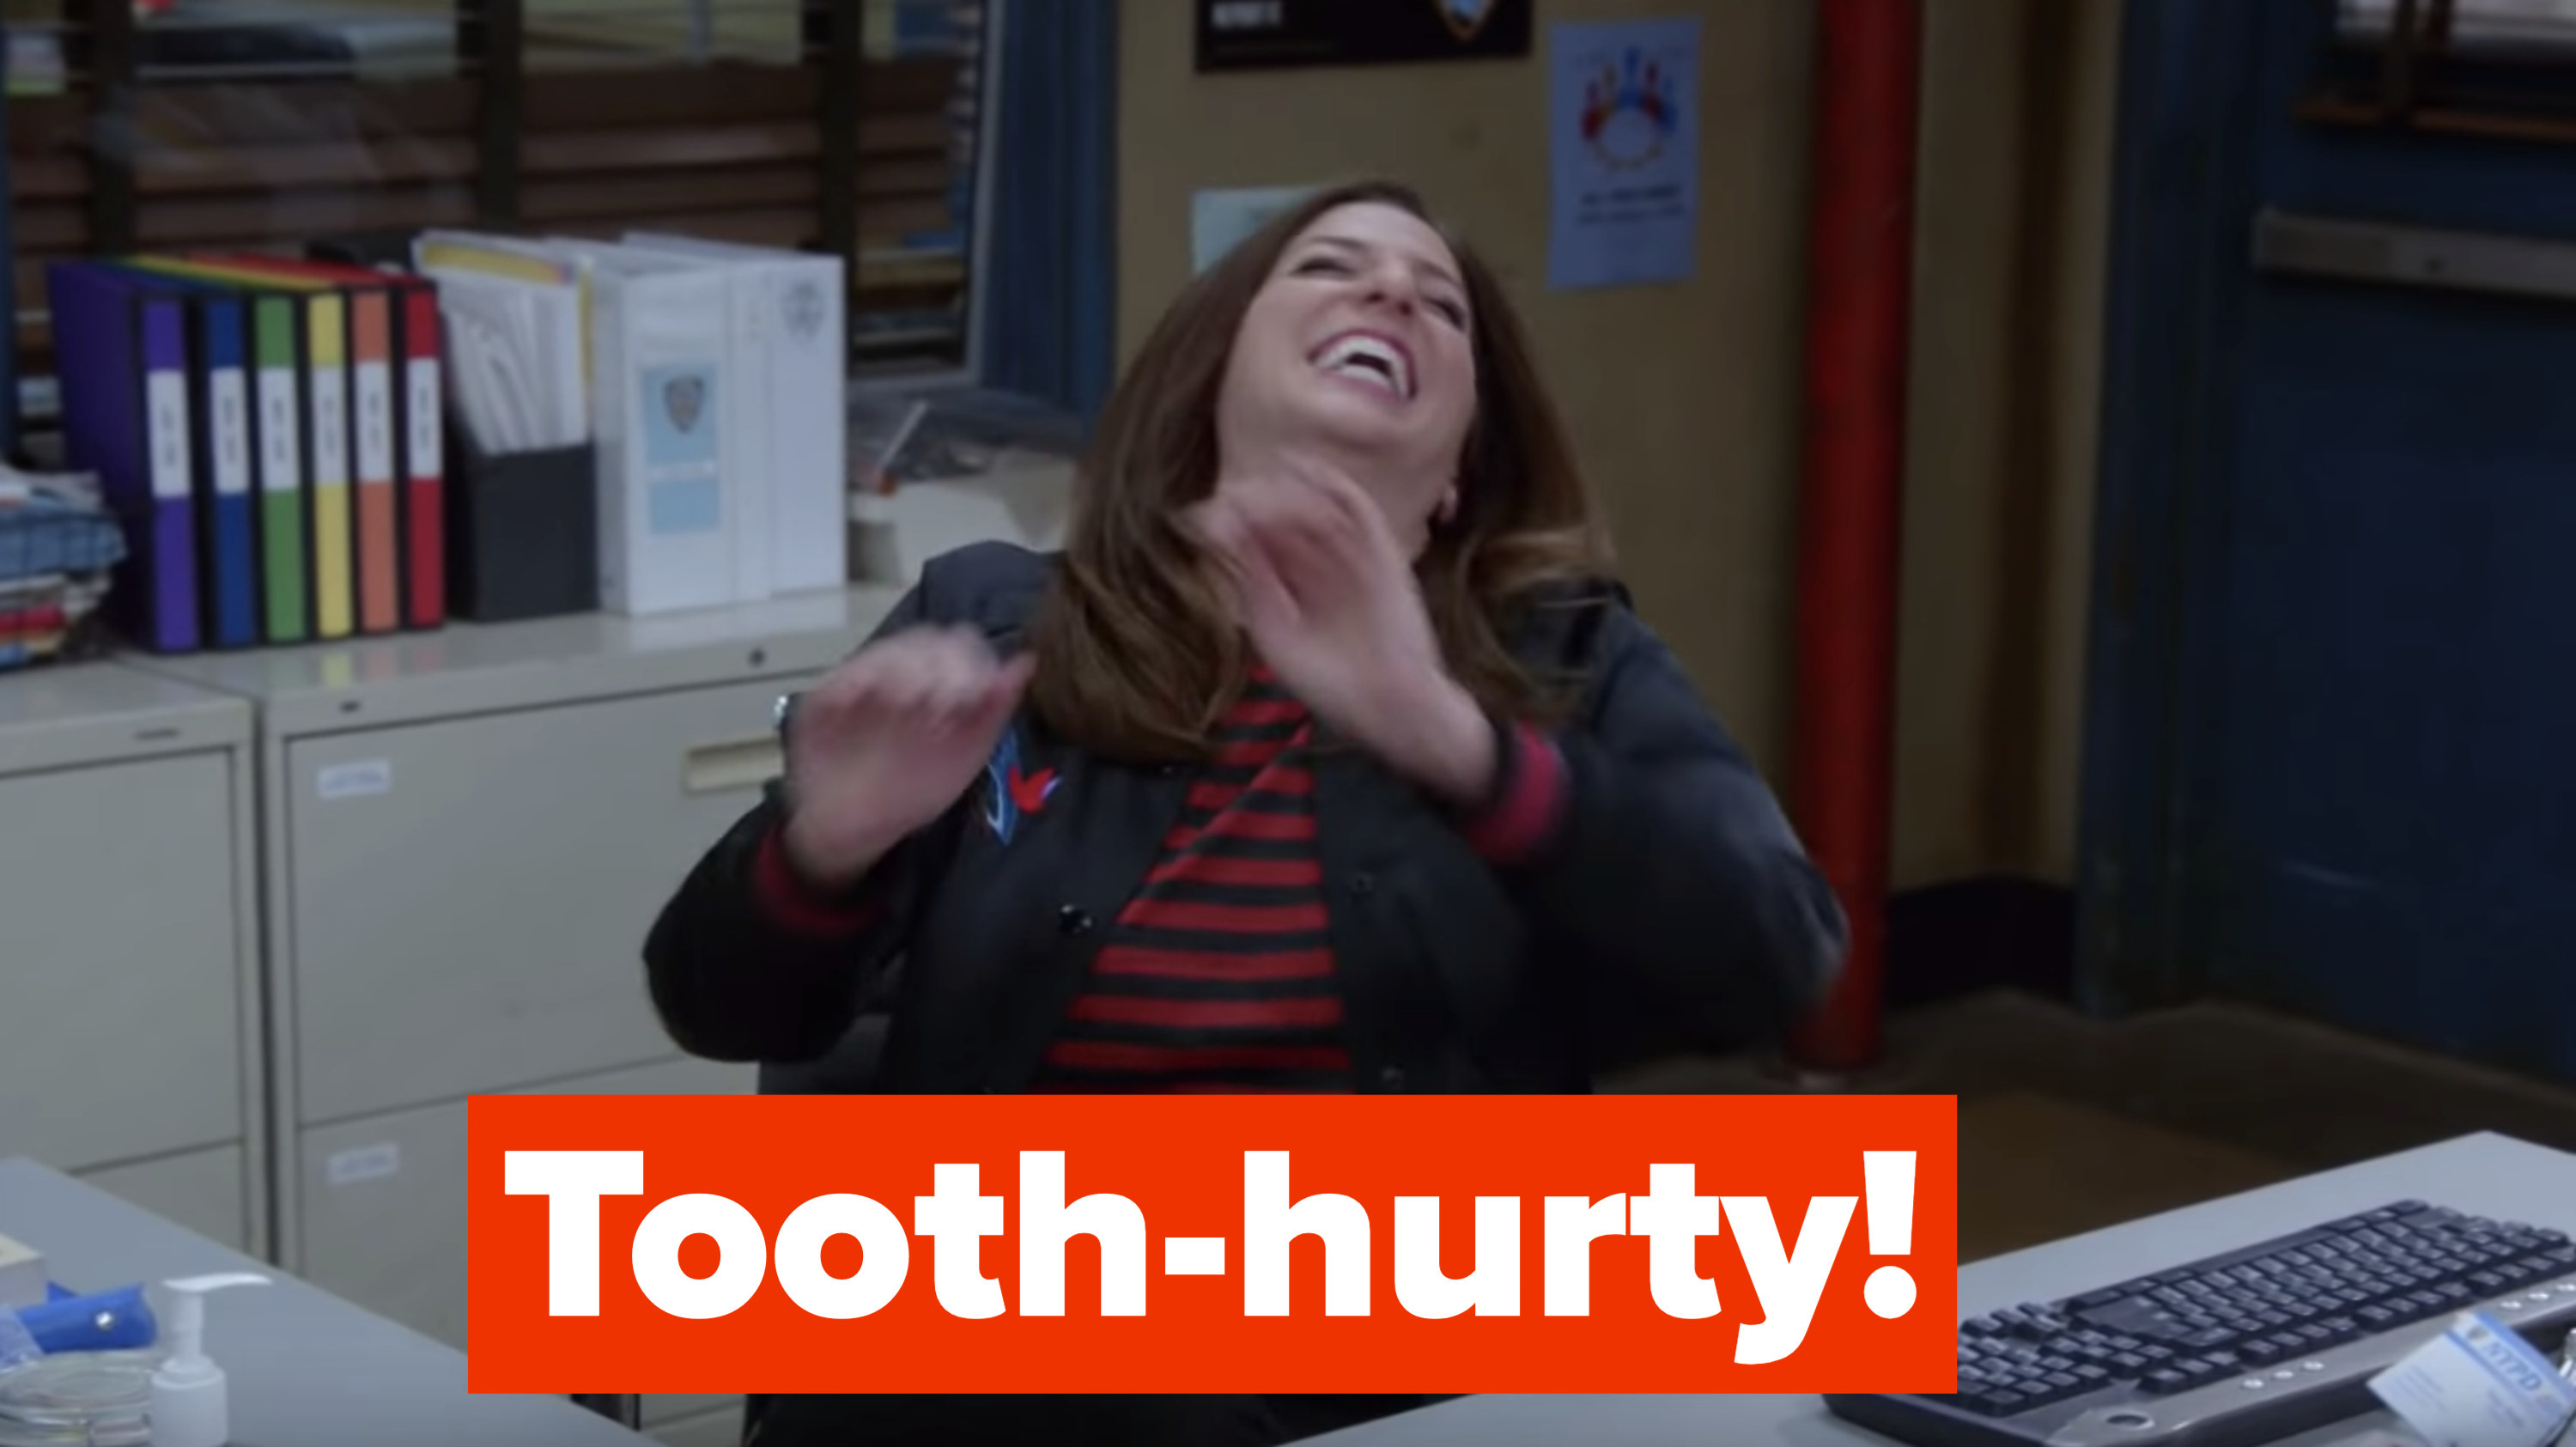 Tooth-hurty